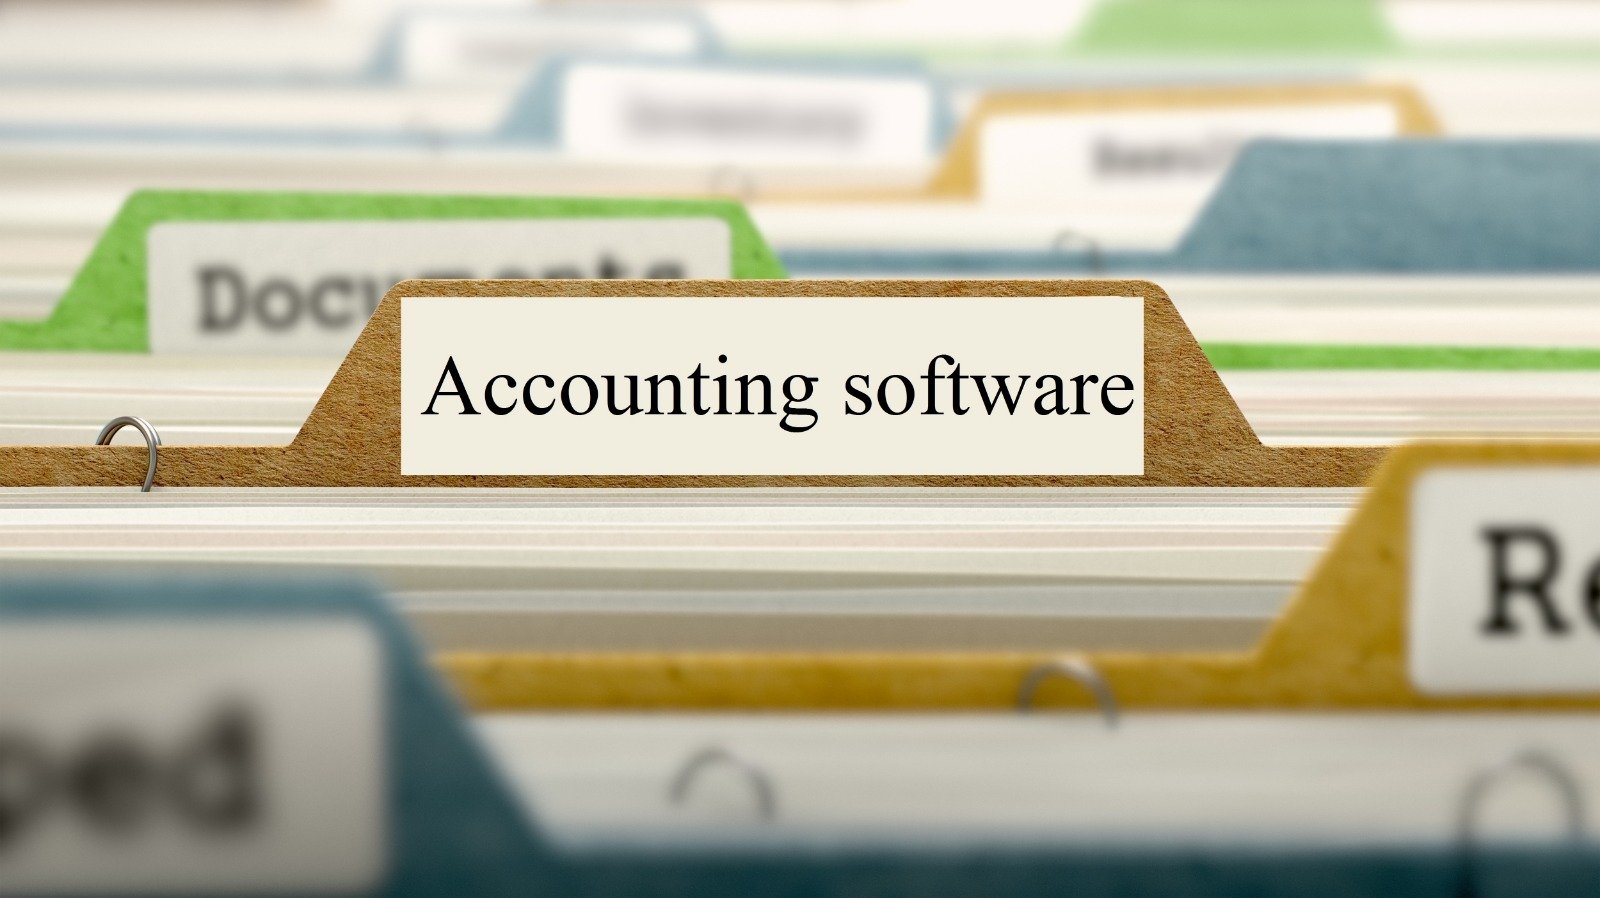 What is the best online accounting software for small business